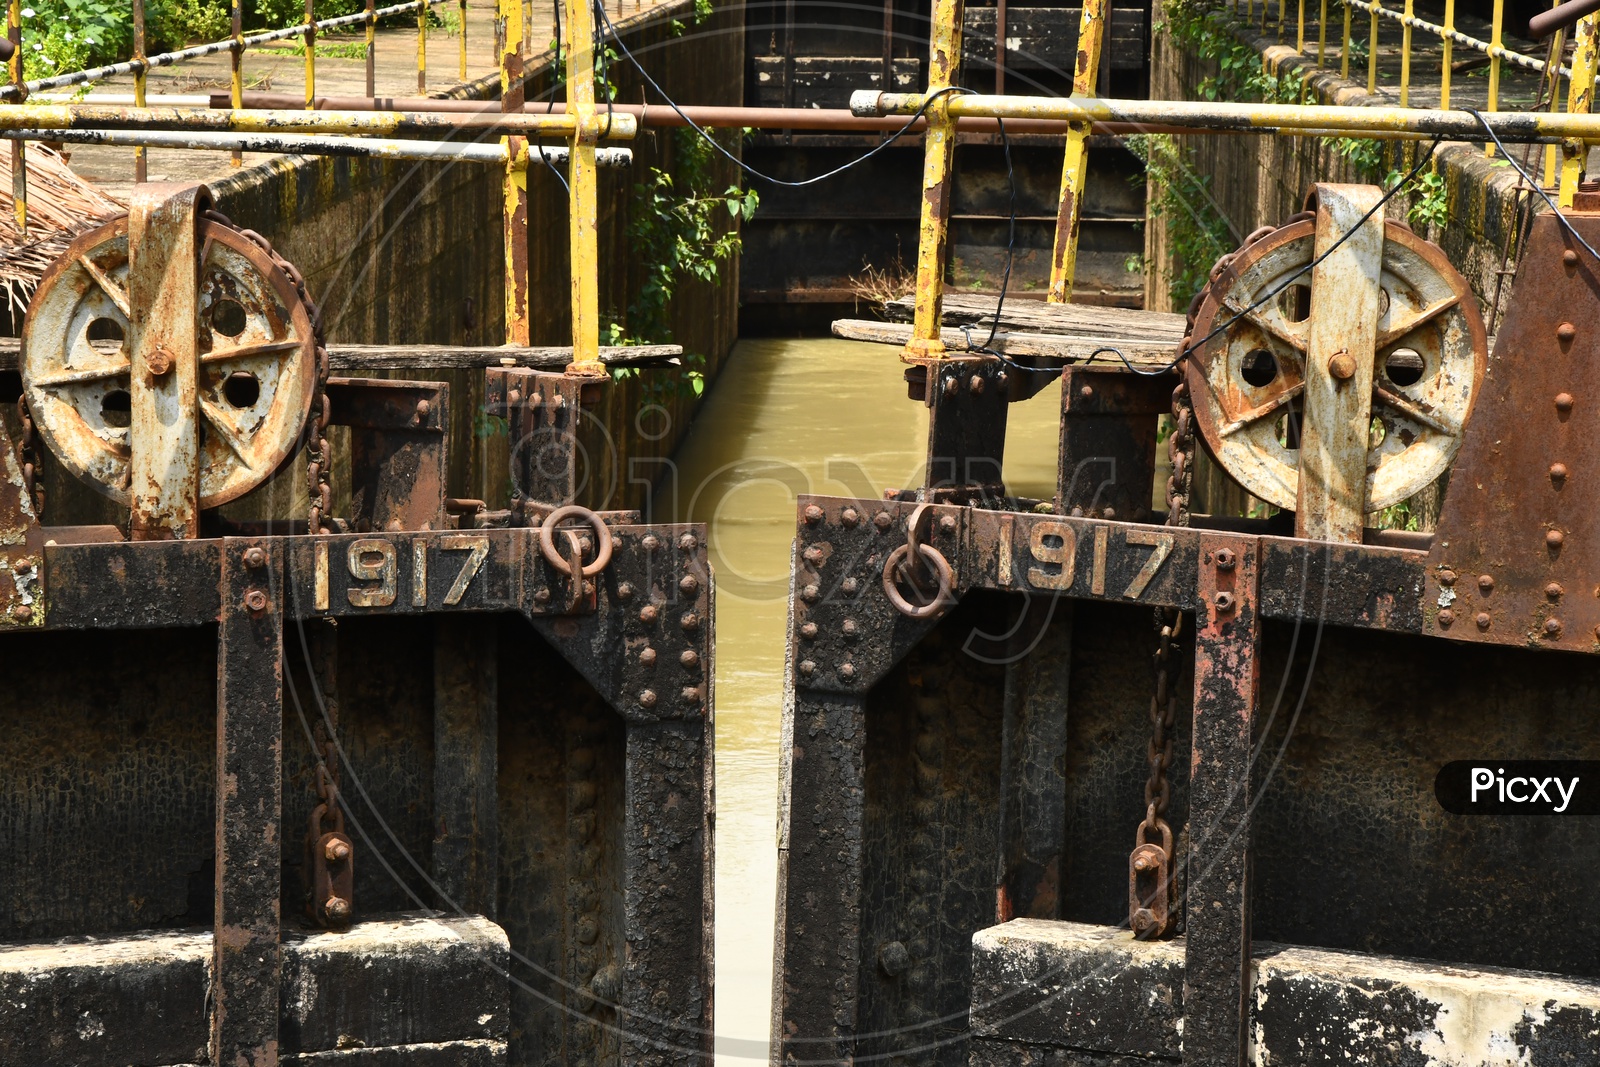 Rusted Iron Check Dam Gates With Levers